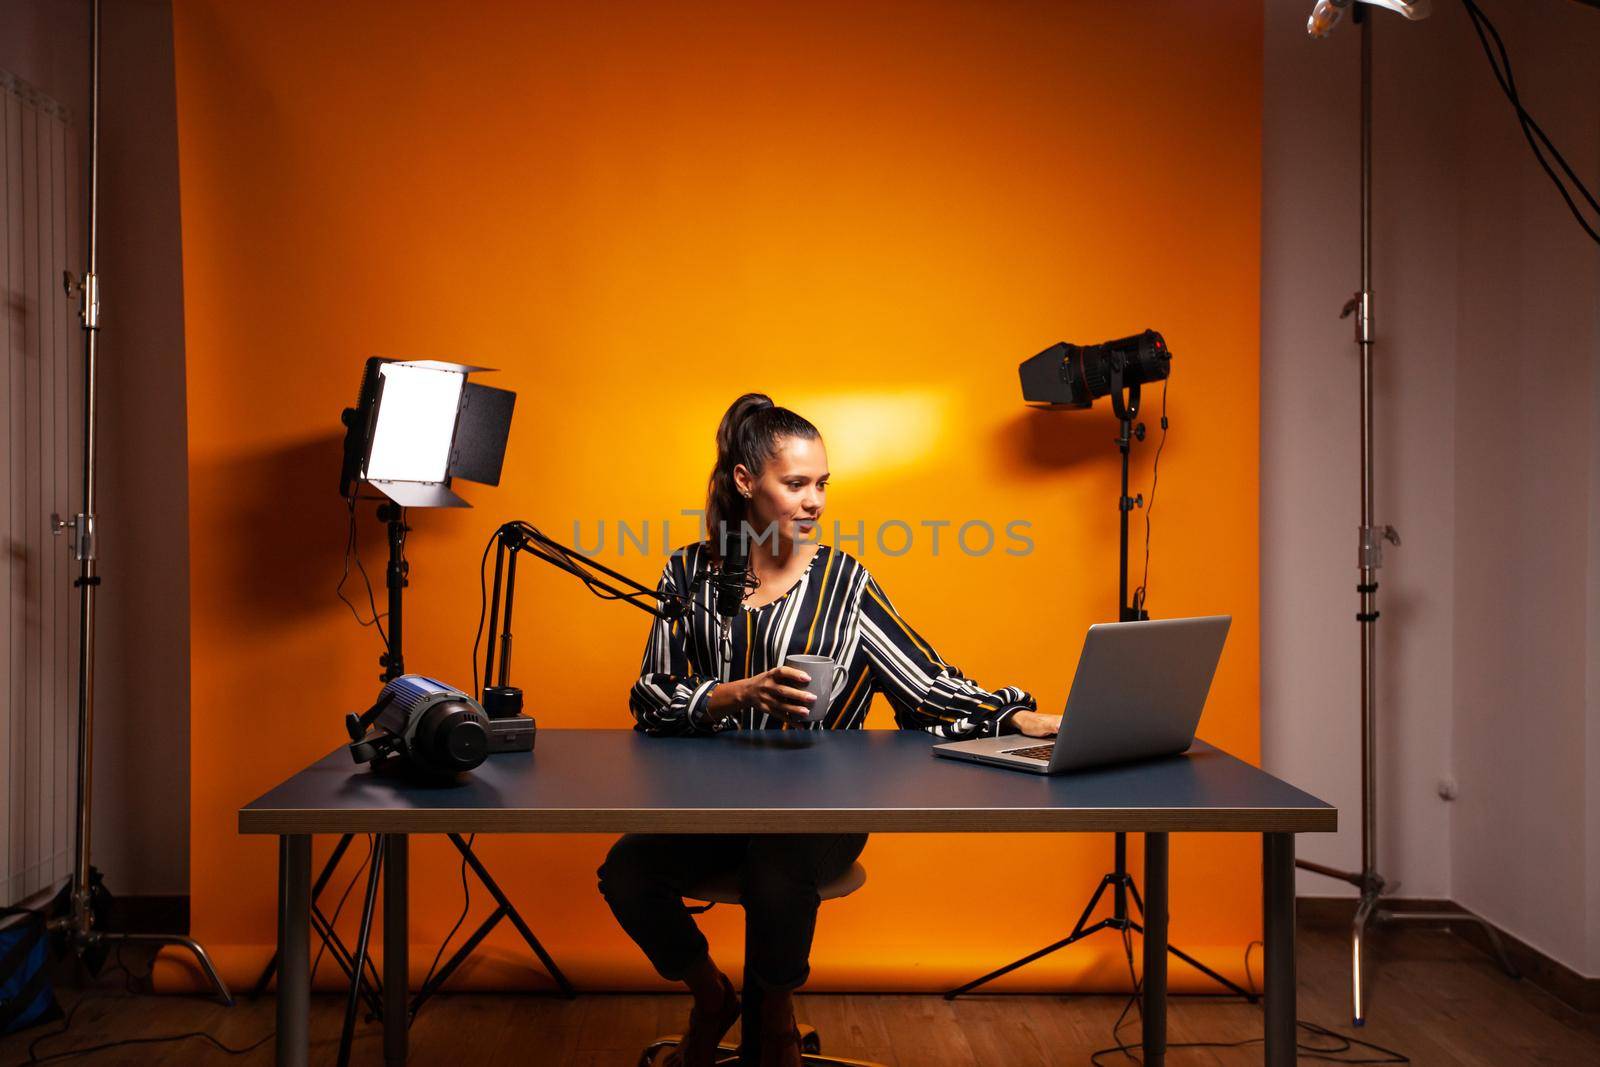 Filmmaker recording podcast for famous vlogger. Content creator new media star on social media recording for internet web online subscribers audience new podcast episode